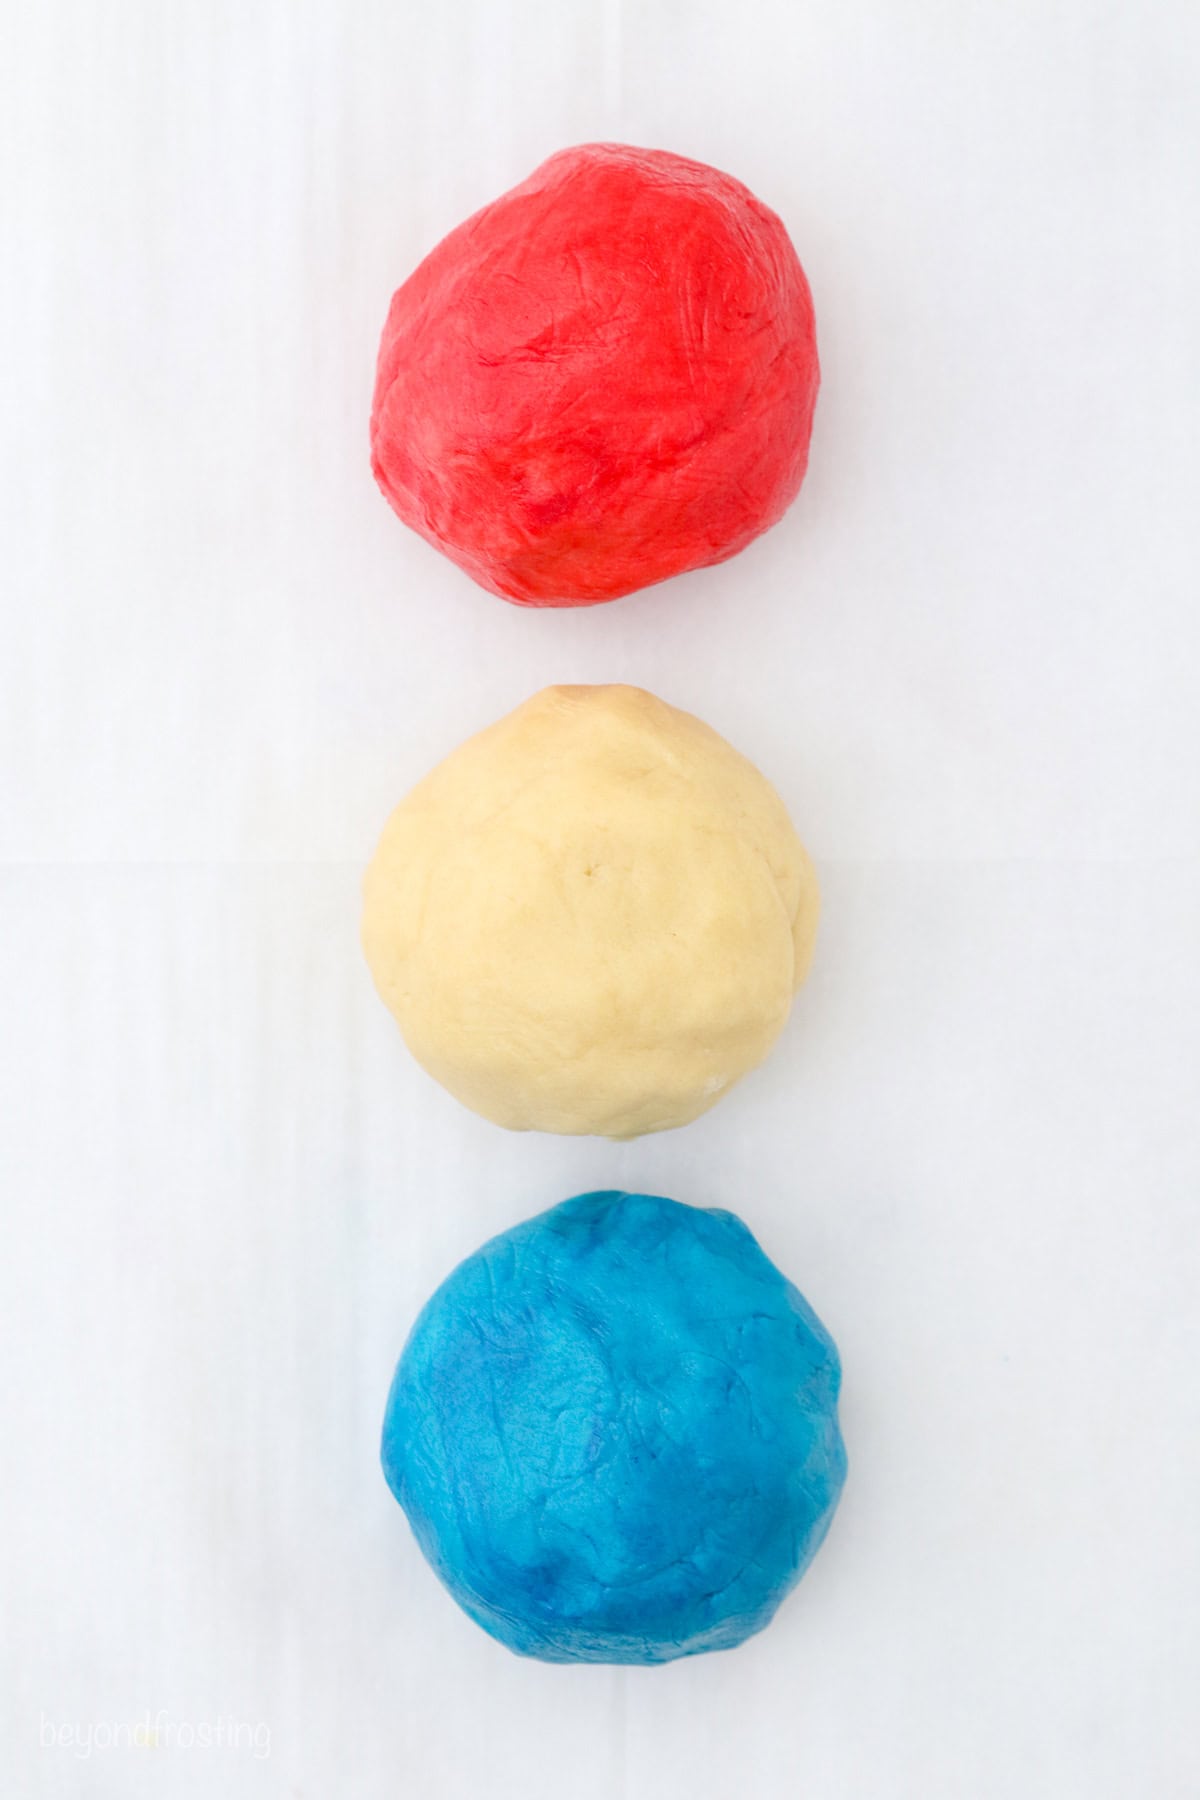 Three balls of cookie dough colored red, white, and blue.